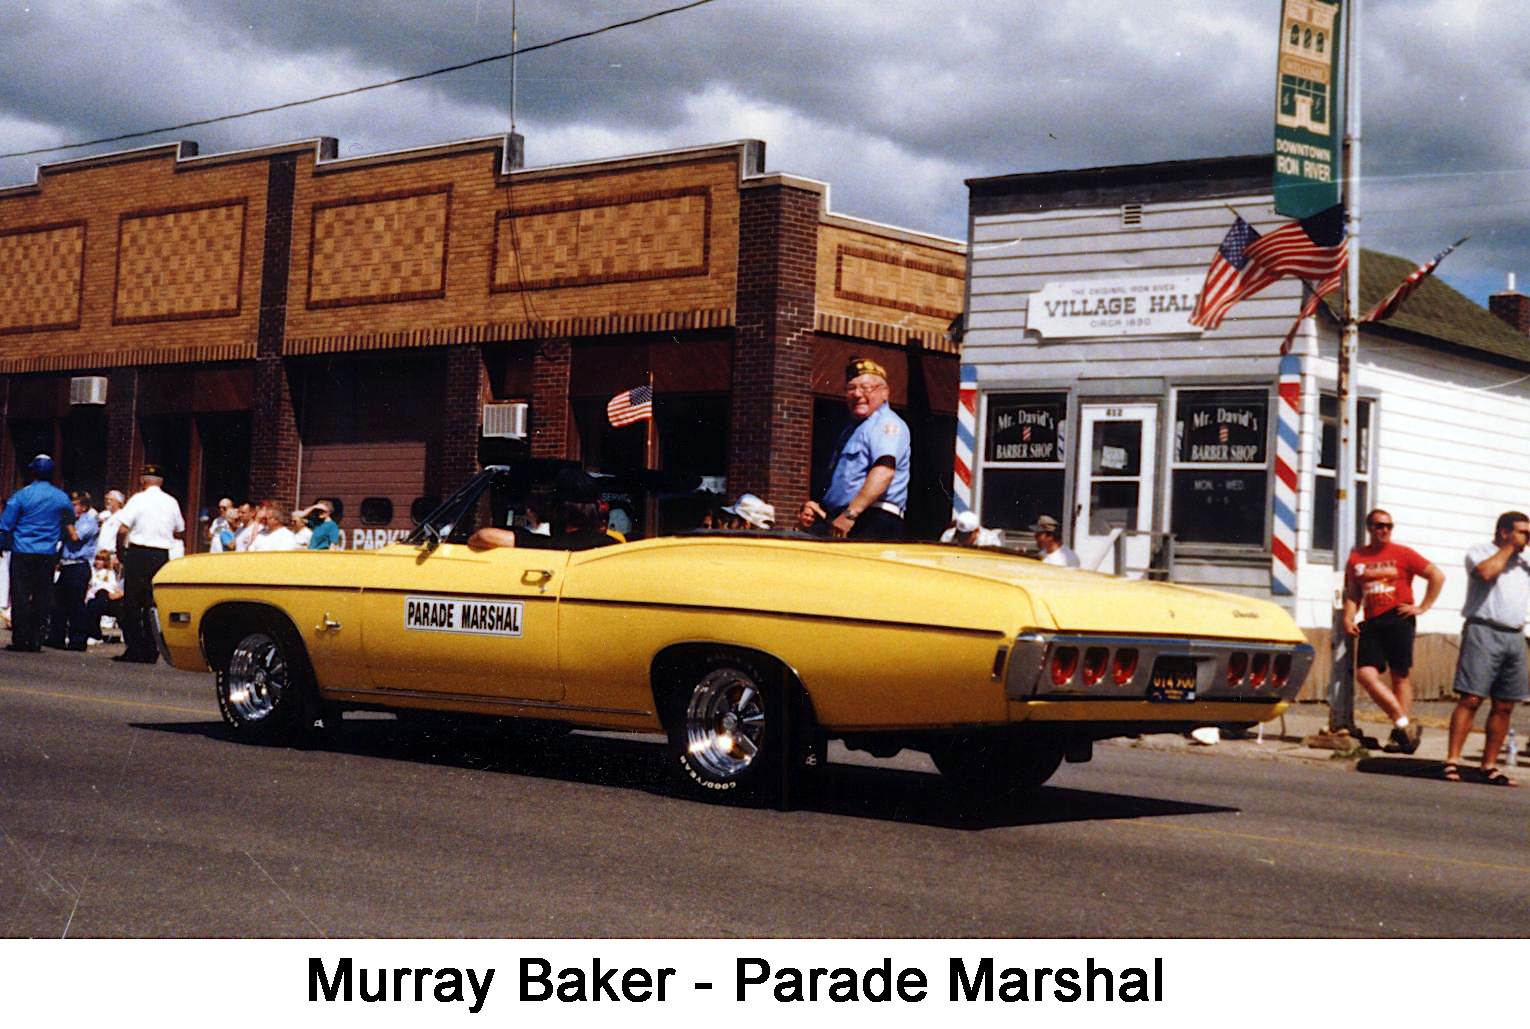 Murray is sitting on the back of a yellow convertible, which is 
     passing in front of the original Iron River village Hall, circa 1890, now 
     Mr. David's Barber Shop.